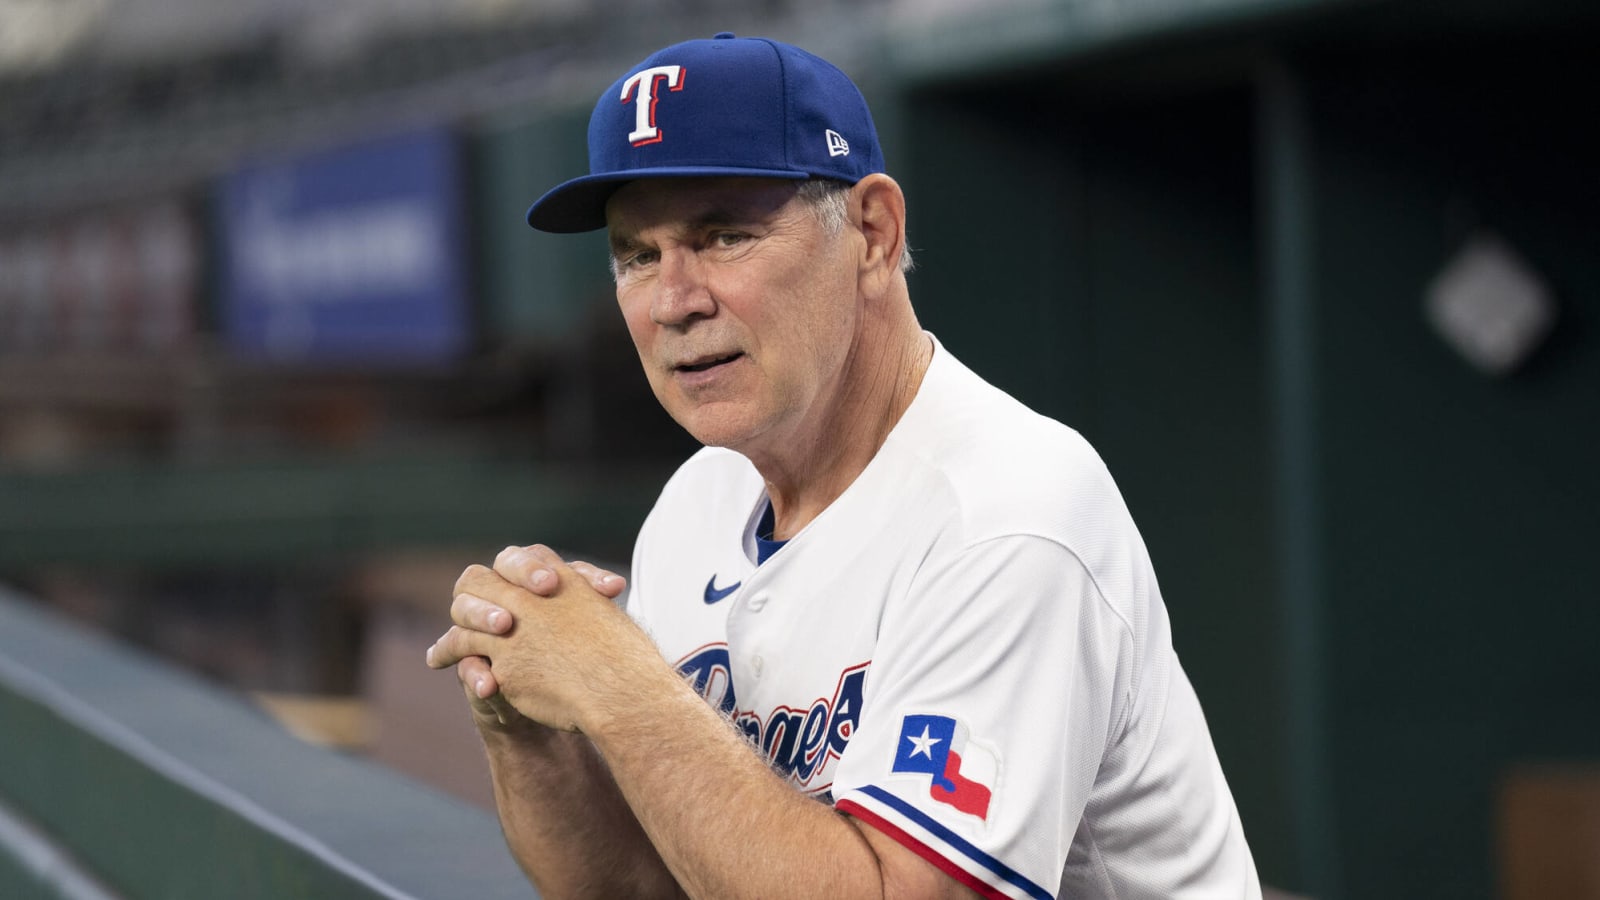 Rangers could hire new pitching coach to Bruce Bochy’s staff?